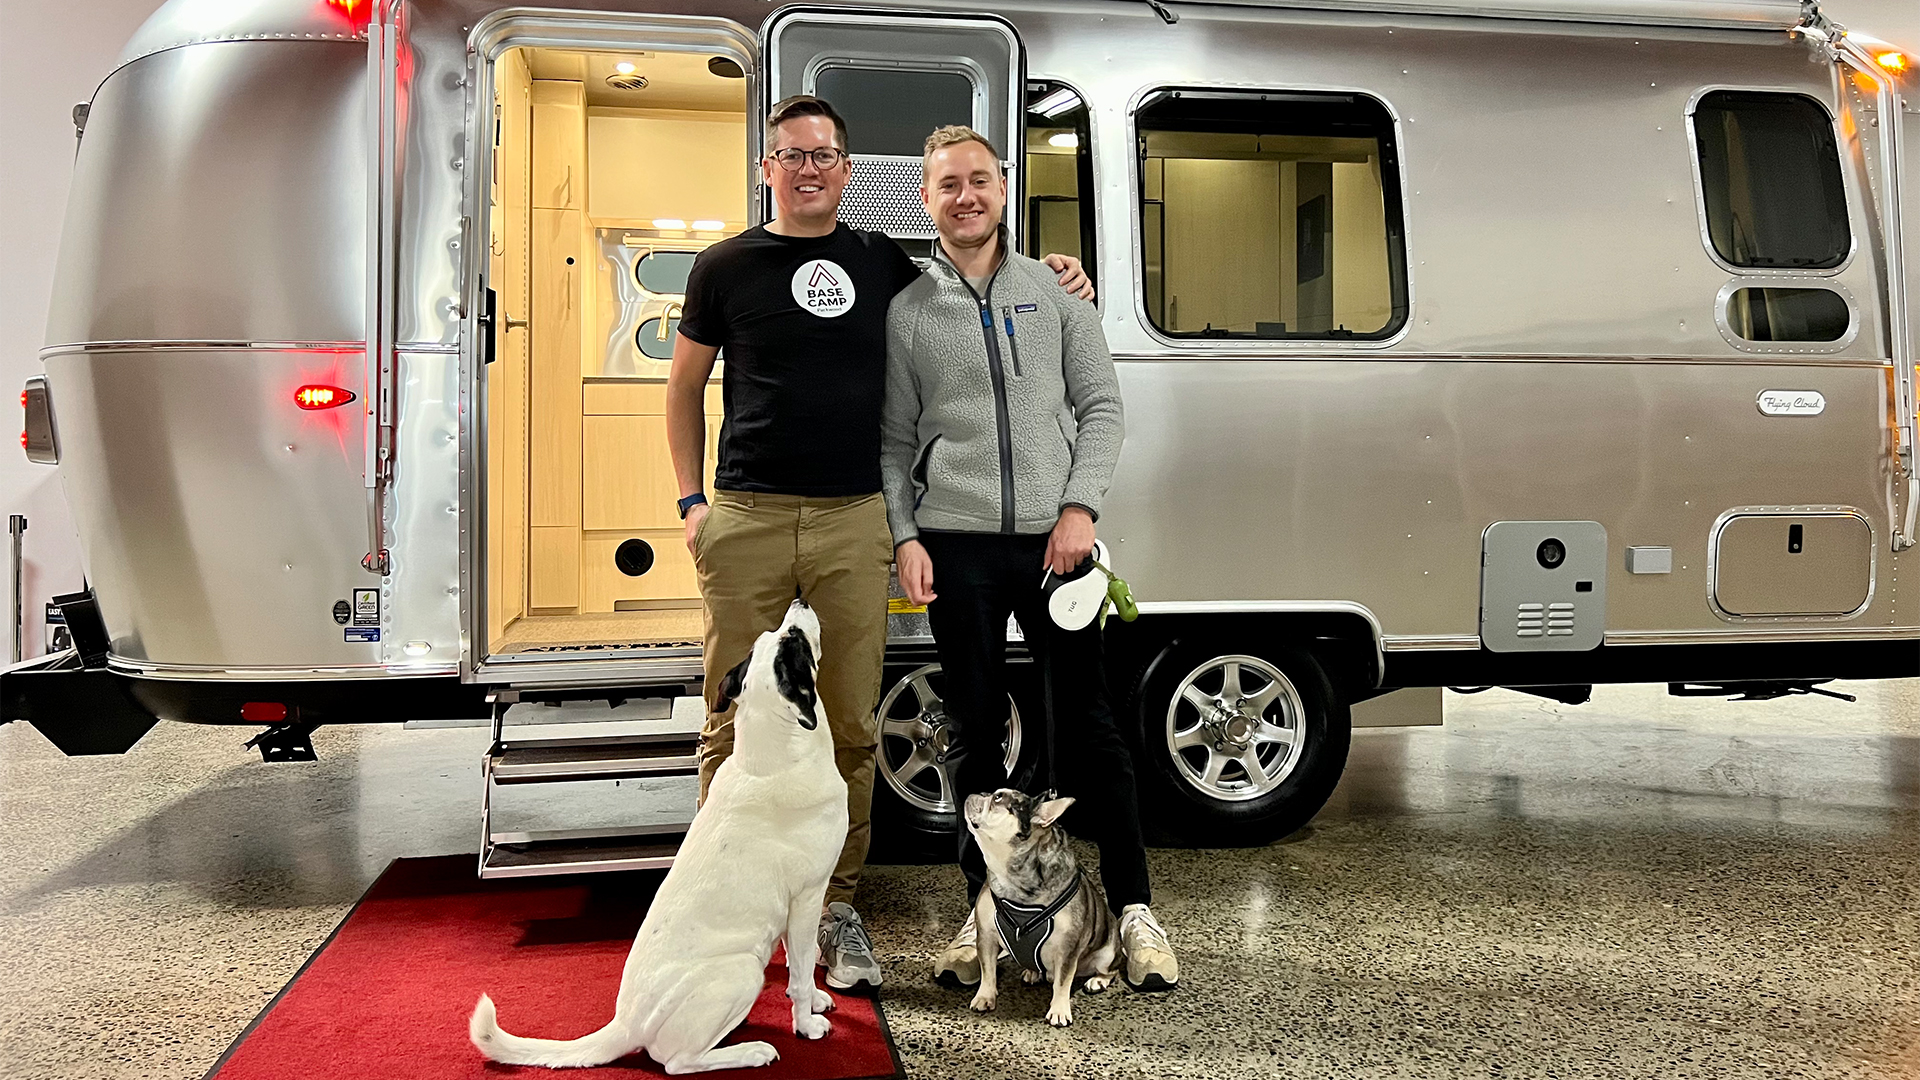 Joe and Conner next to their new Airstream Flying Cloud travel trailer with their two dogs.